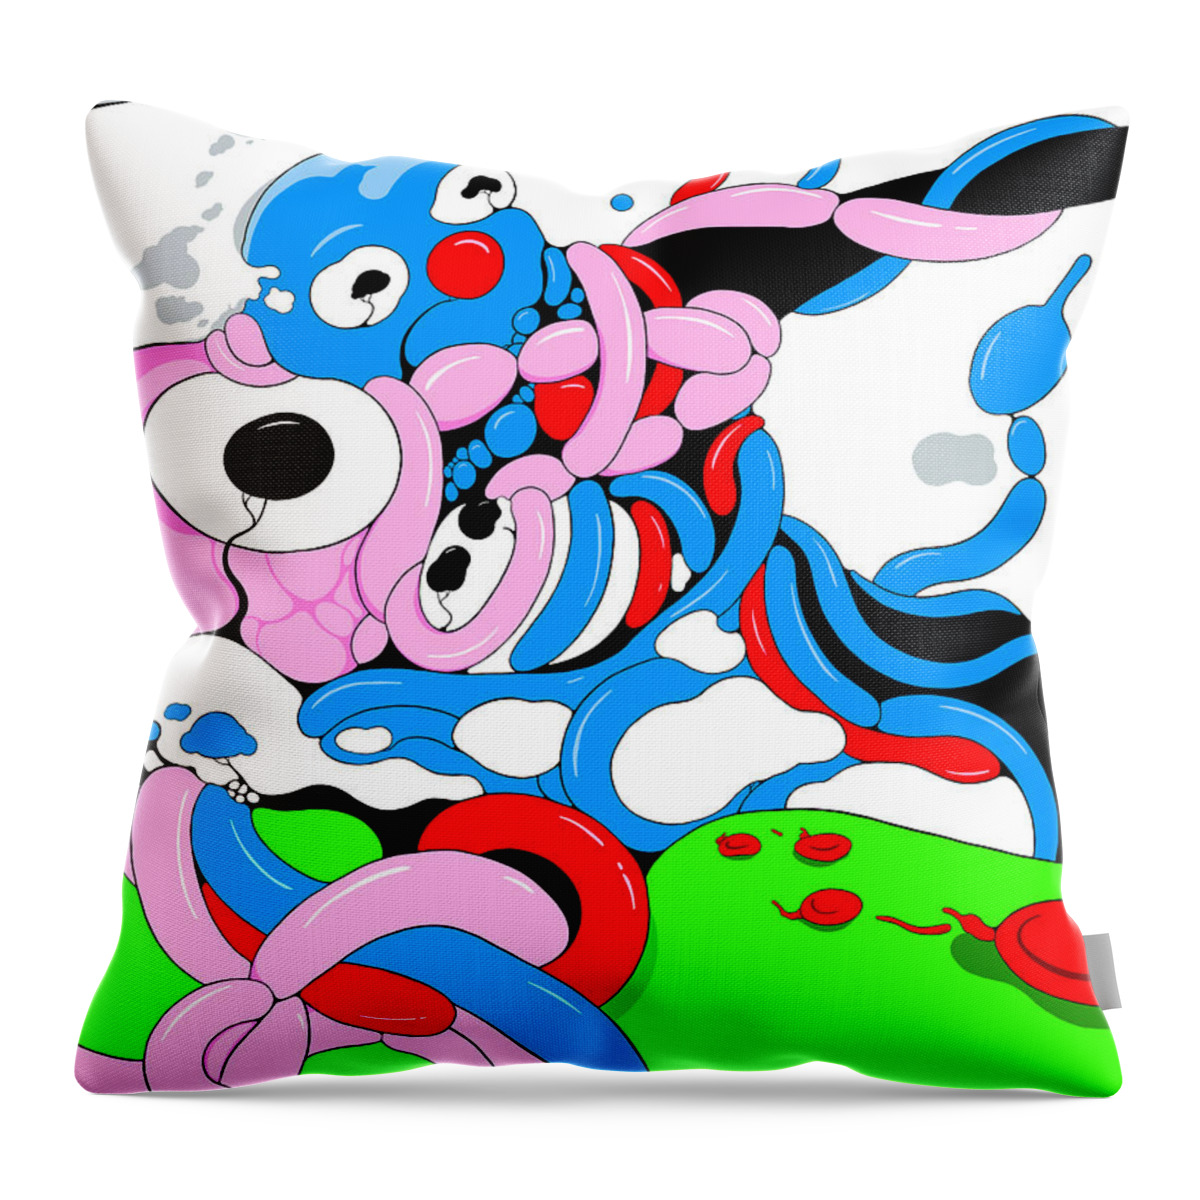 Balloons Throw Pillow featuring the digital art Twisted Circus by Craig Tilley